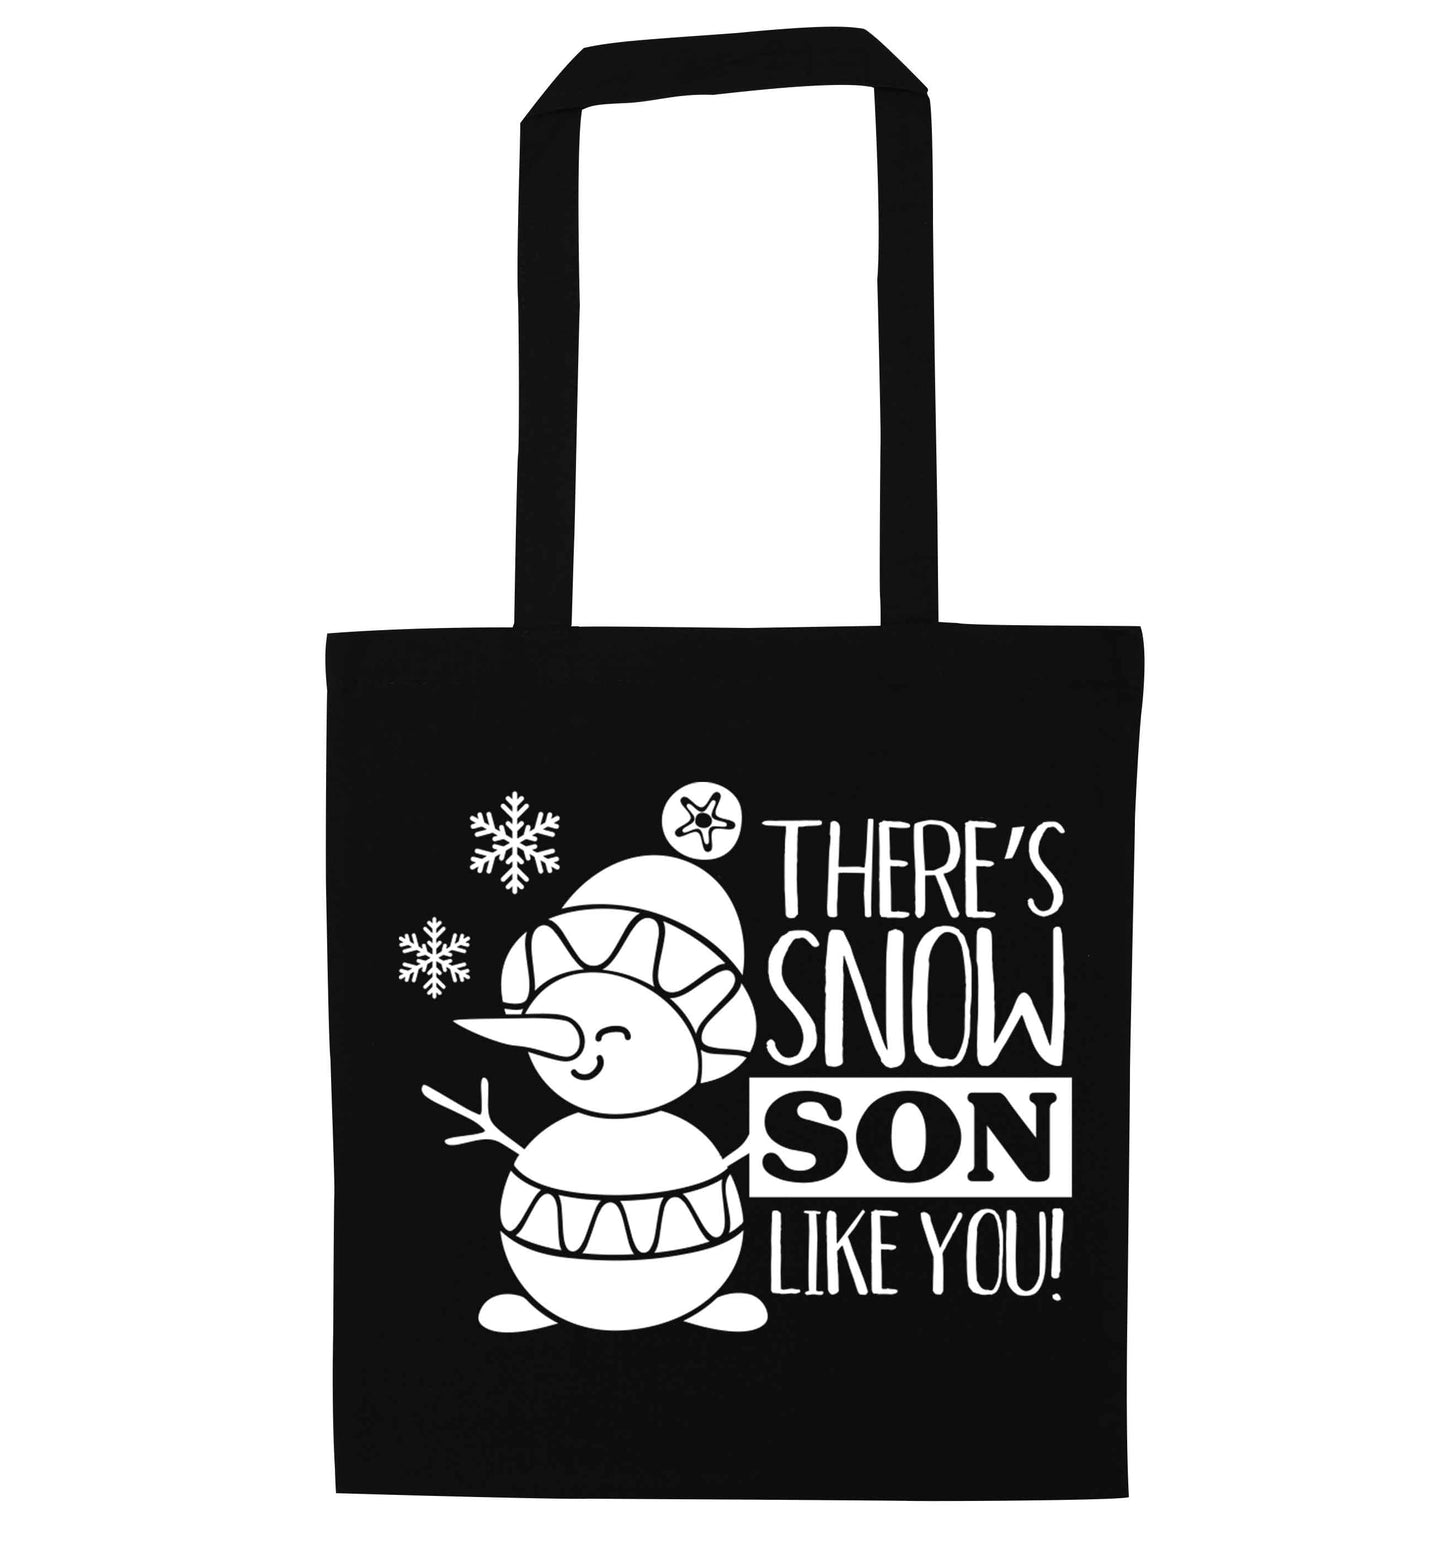 There's snow son like you black tote bag